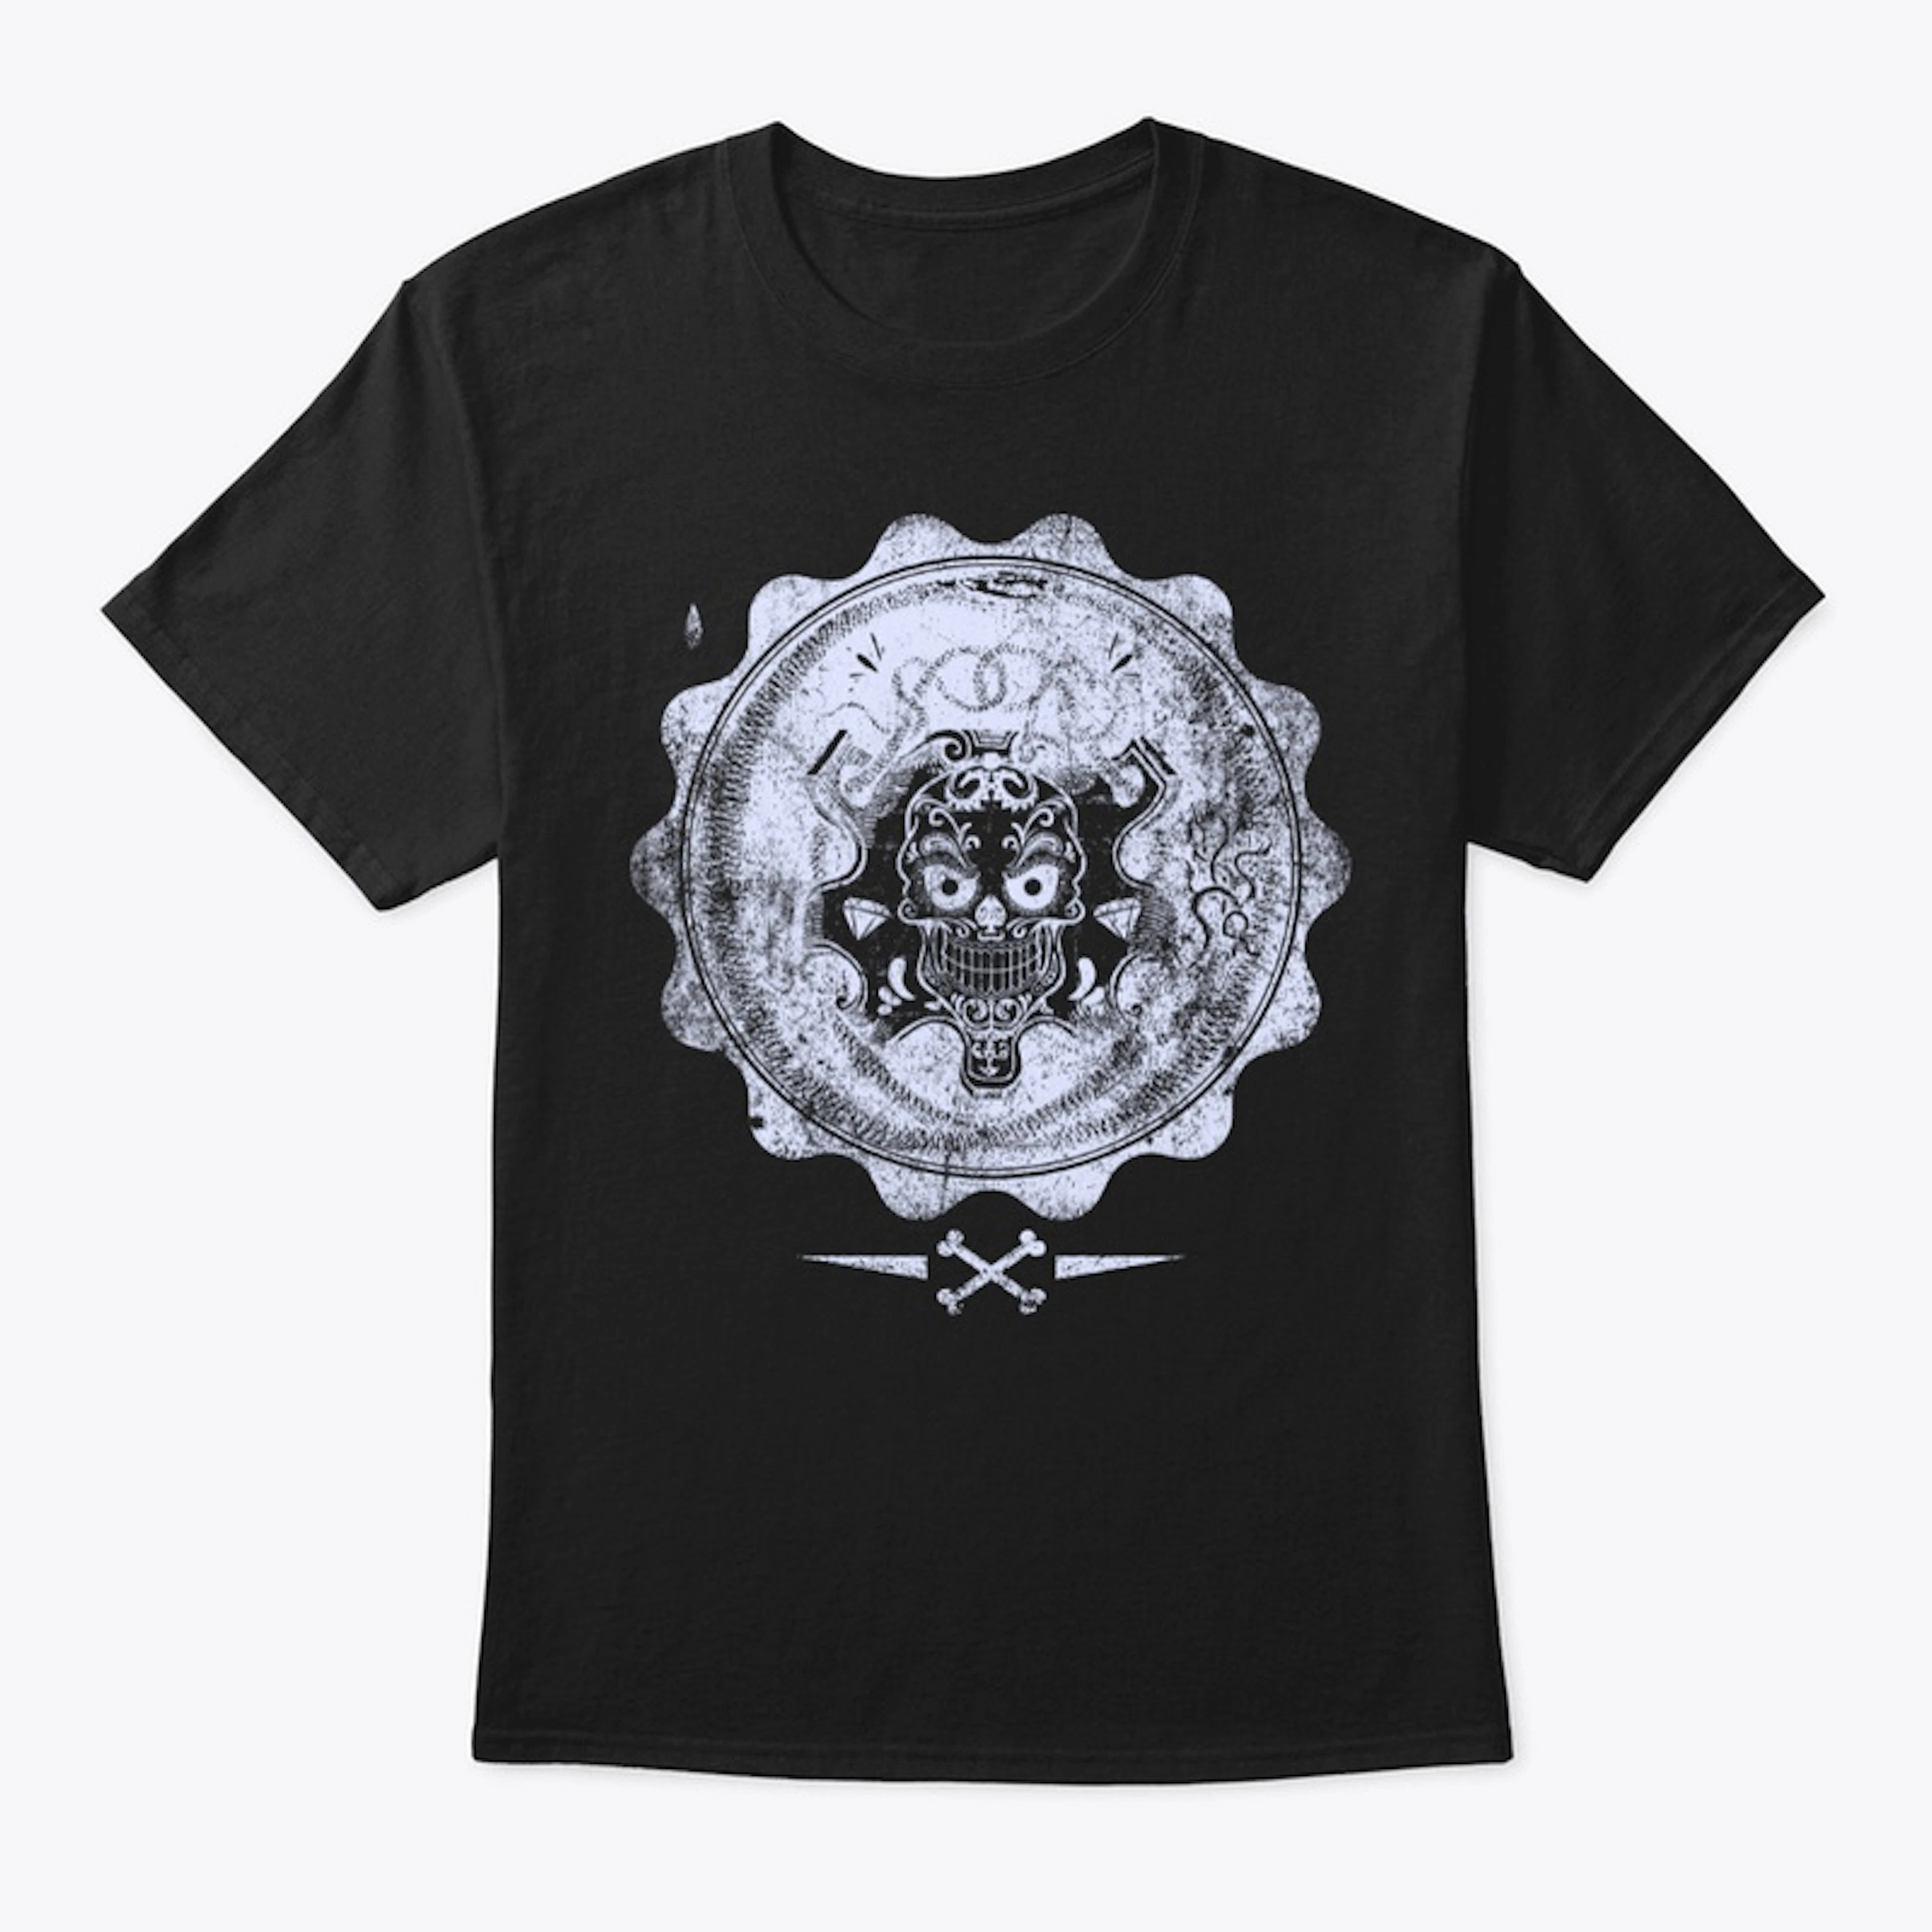 The GearZombie Cog Tag Shirt